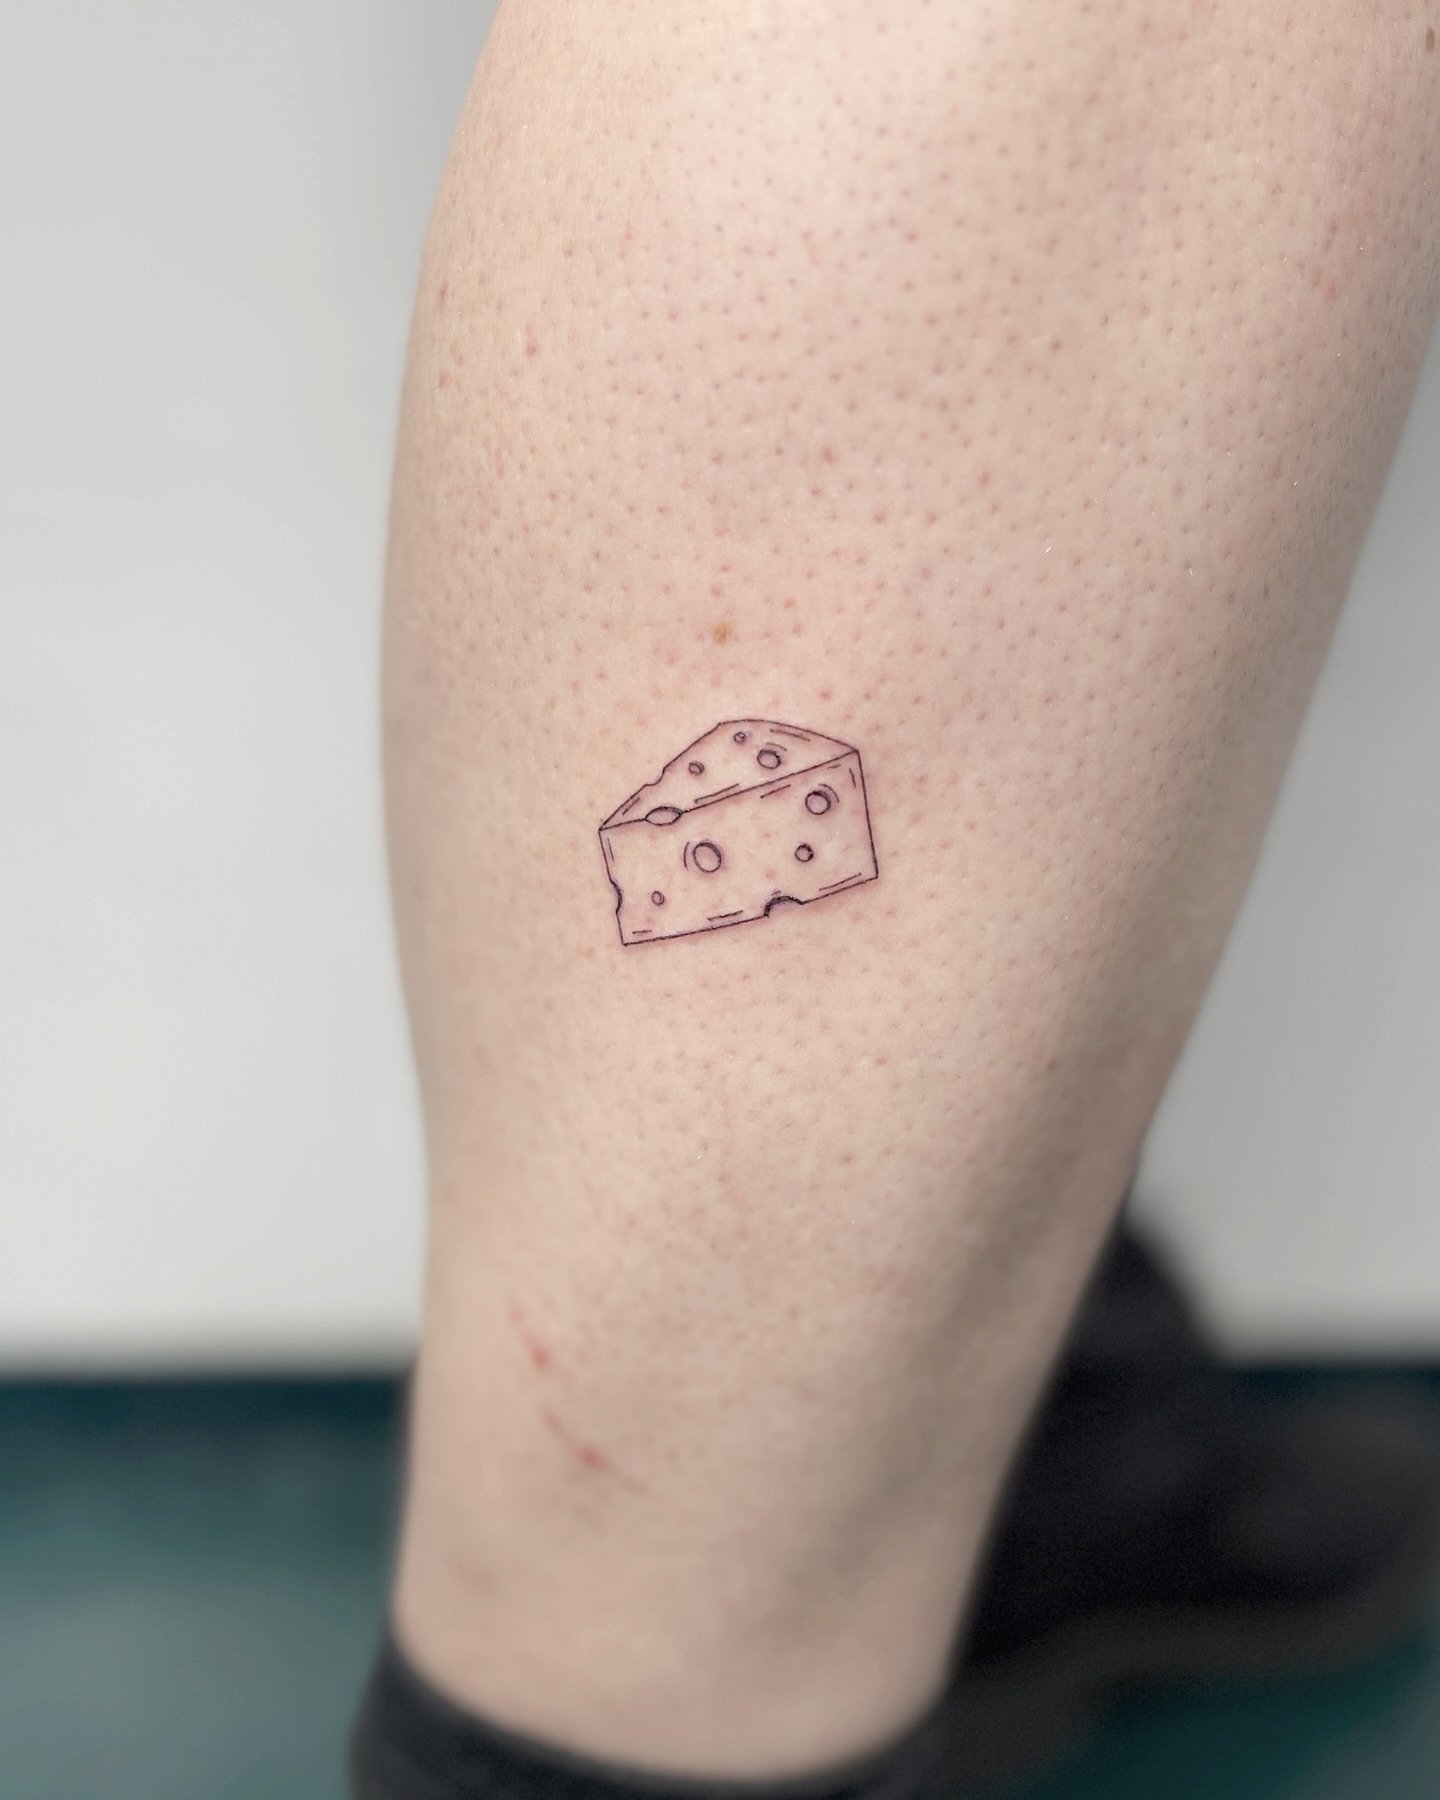 #cheeseplease 🧀
A piece of cheese for Mr Mouse. Loved it!
Thanks for your trust 🖤

⫸ 
Booking info: If you want to get inked, please stay patient. My books are closed. New dates will be announced in the beginning of June 🫶🏻 #nodms 

#cheesetattoo